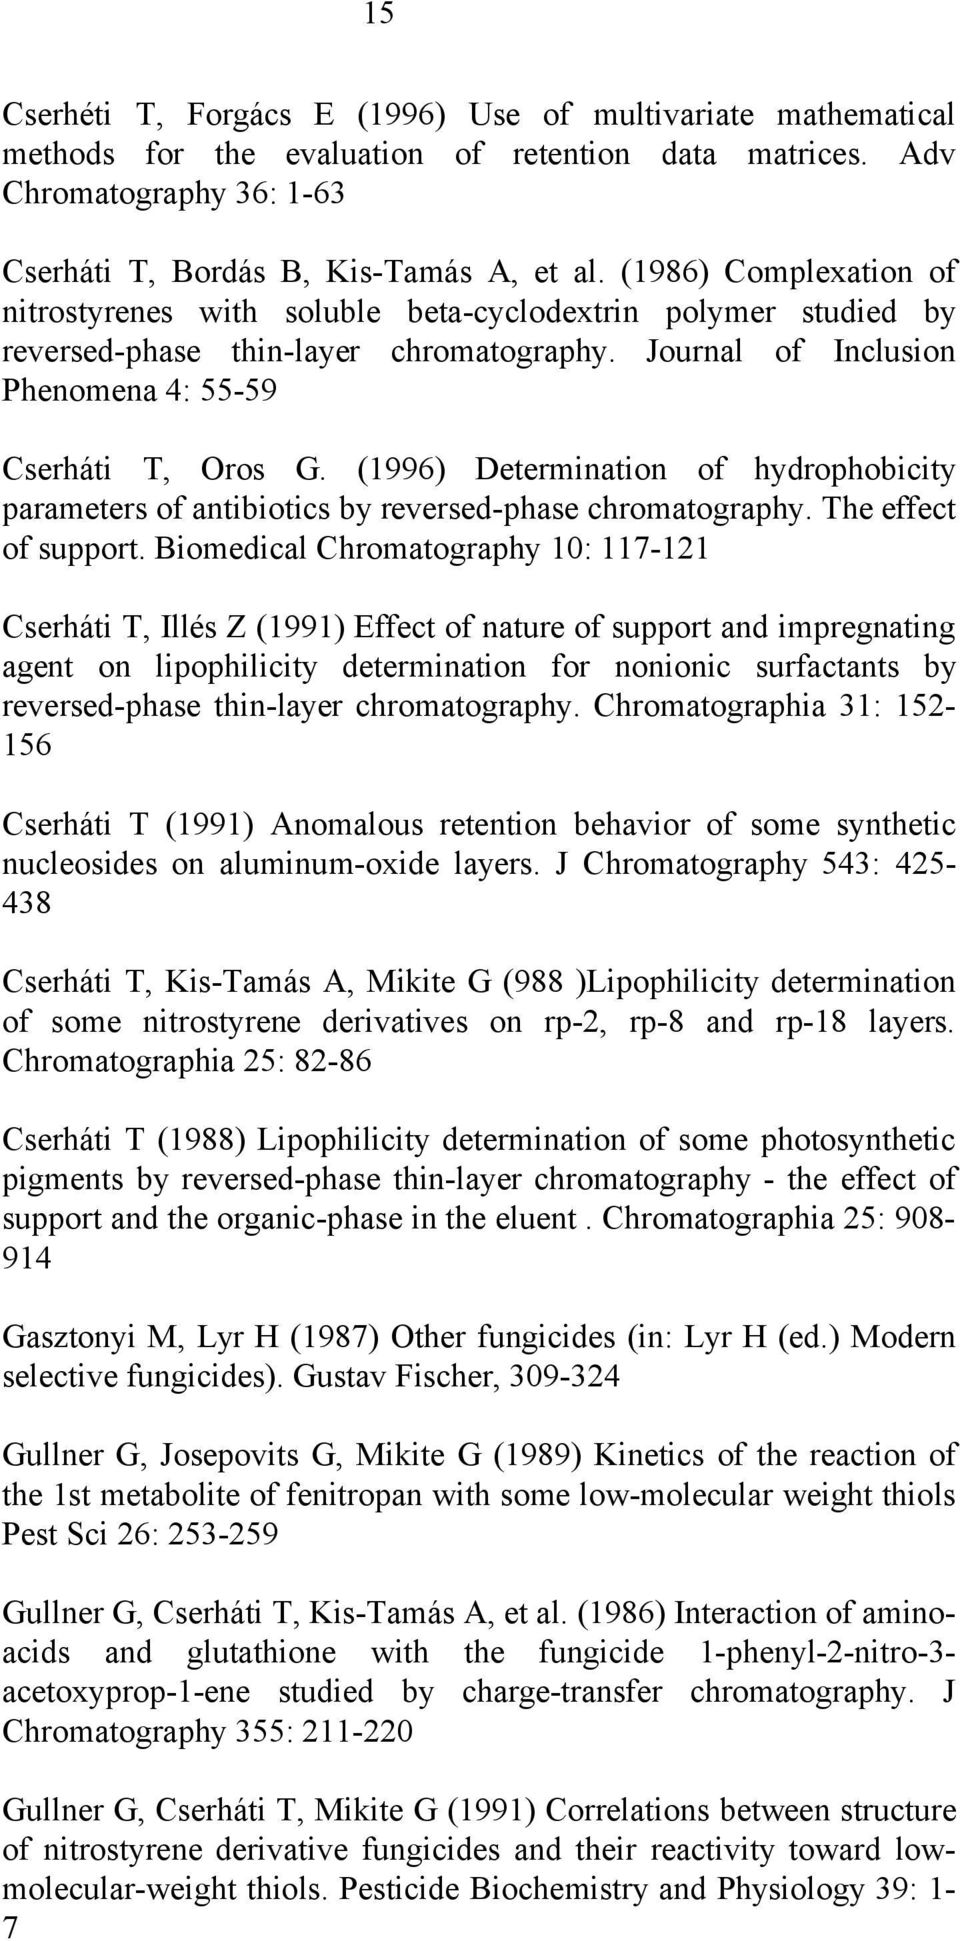 (1996) Determination of hydrophobicity parameters of antibiotics by reversed-phase chromatography. The effect of support.